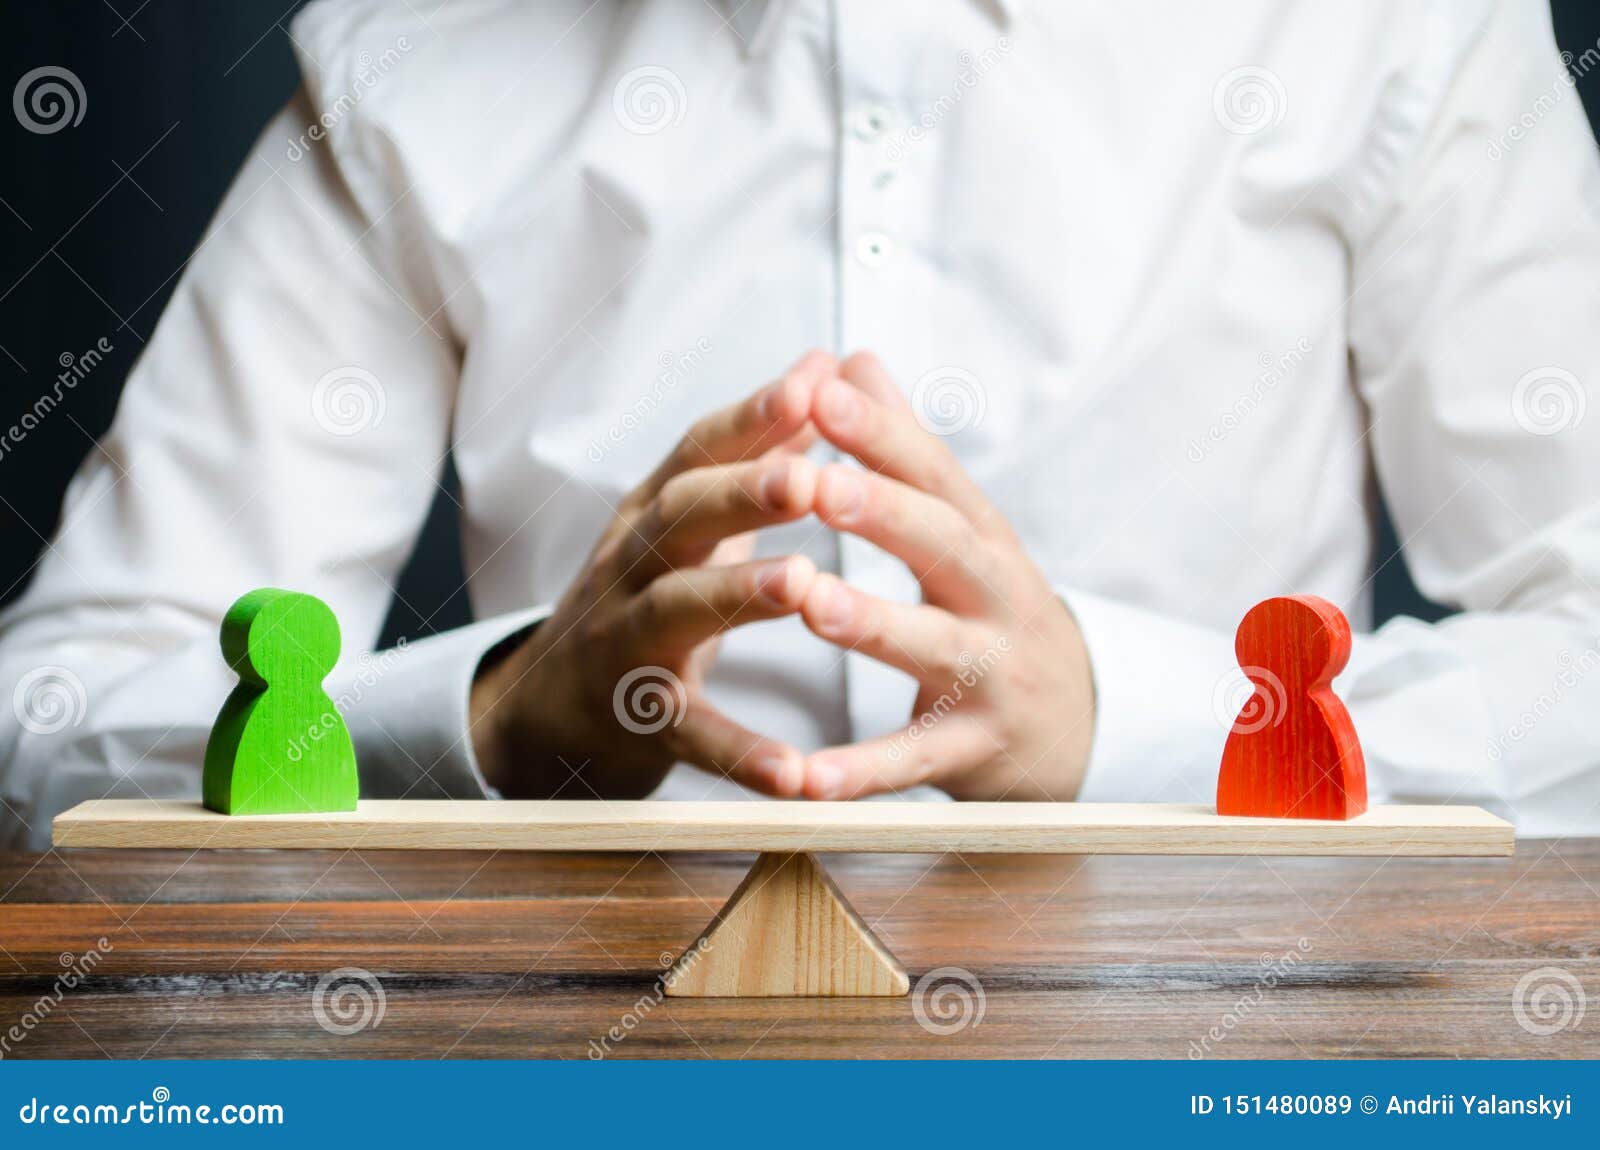 a man with hands in the lock and looks at the rival red and green figures on a scales. the concept of conflict resolution